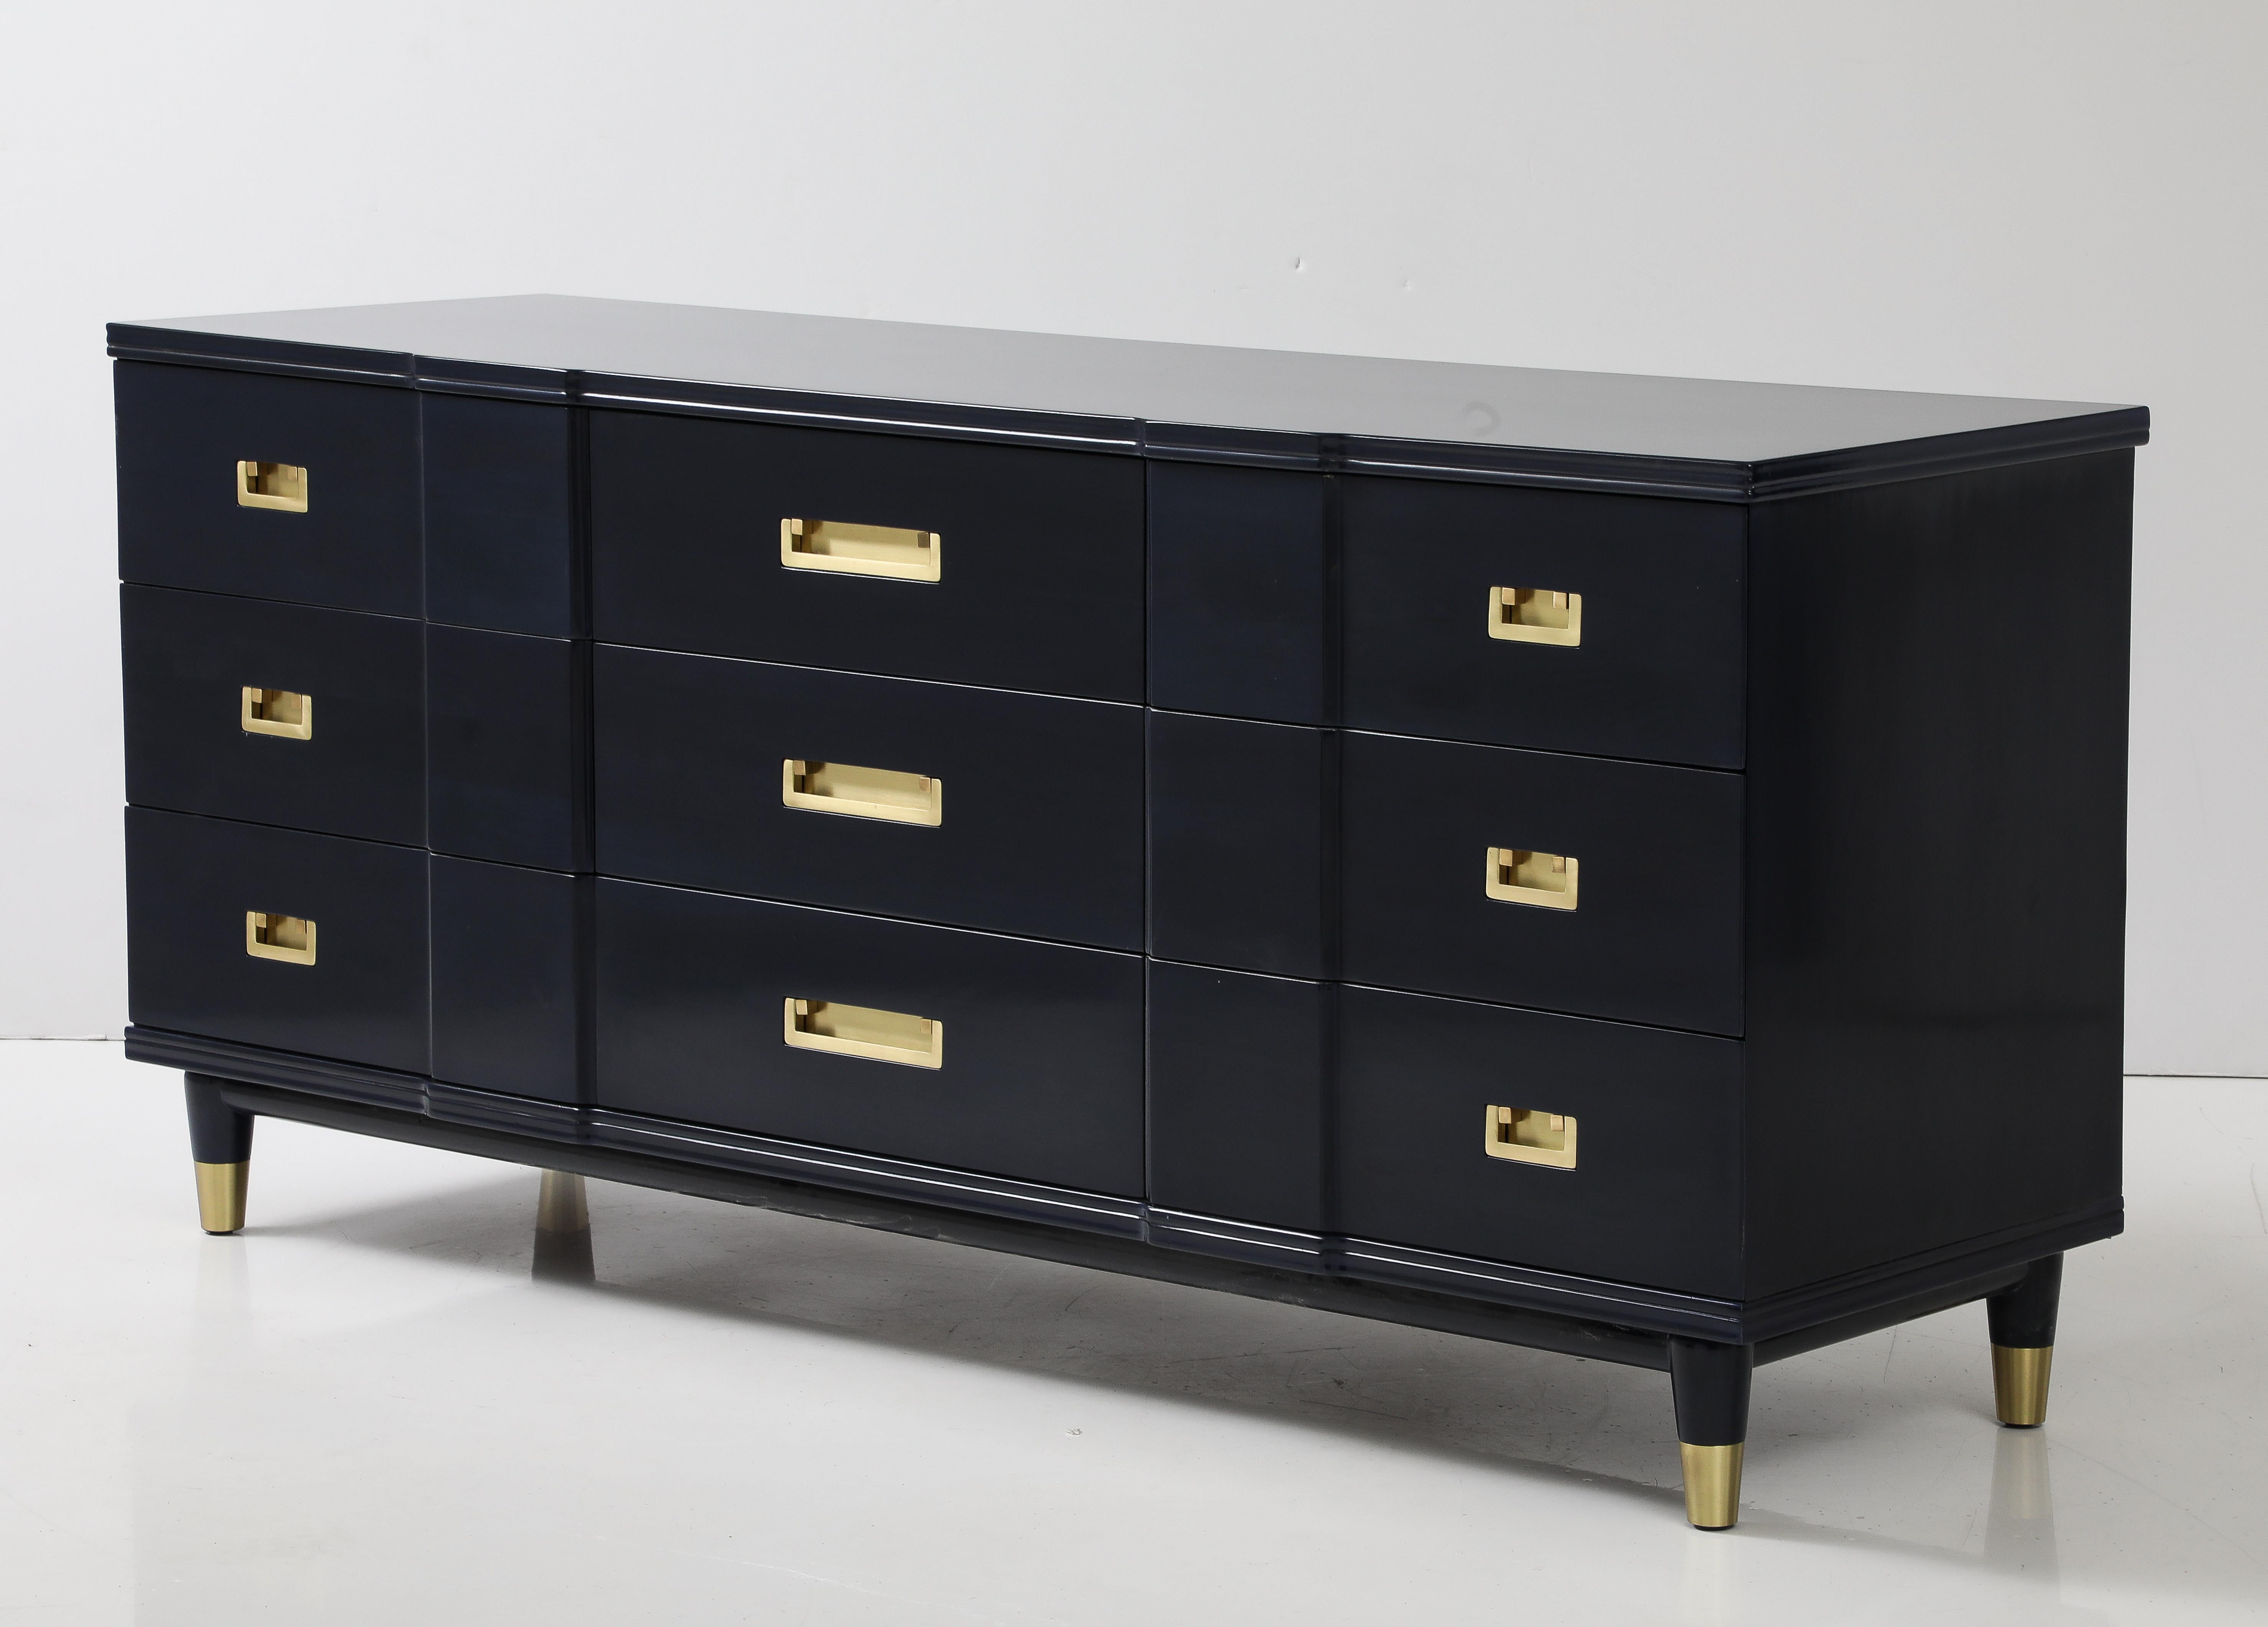 Mid Century solid Cherry wood dresser custom stained updatred in a dark Sapphire Midnight Blue. The brass hardware has been professionally updated in a satin finish. The 9 drawers provide ample storage. Mint restored 